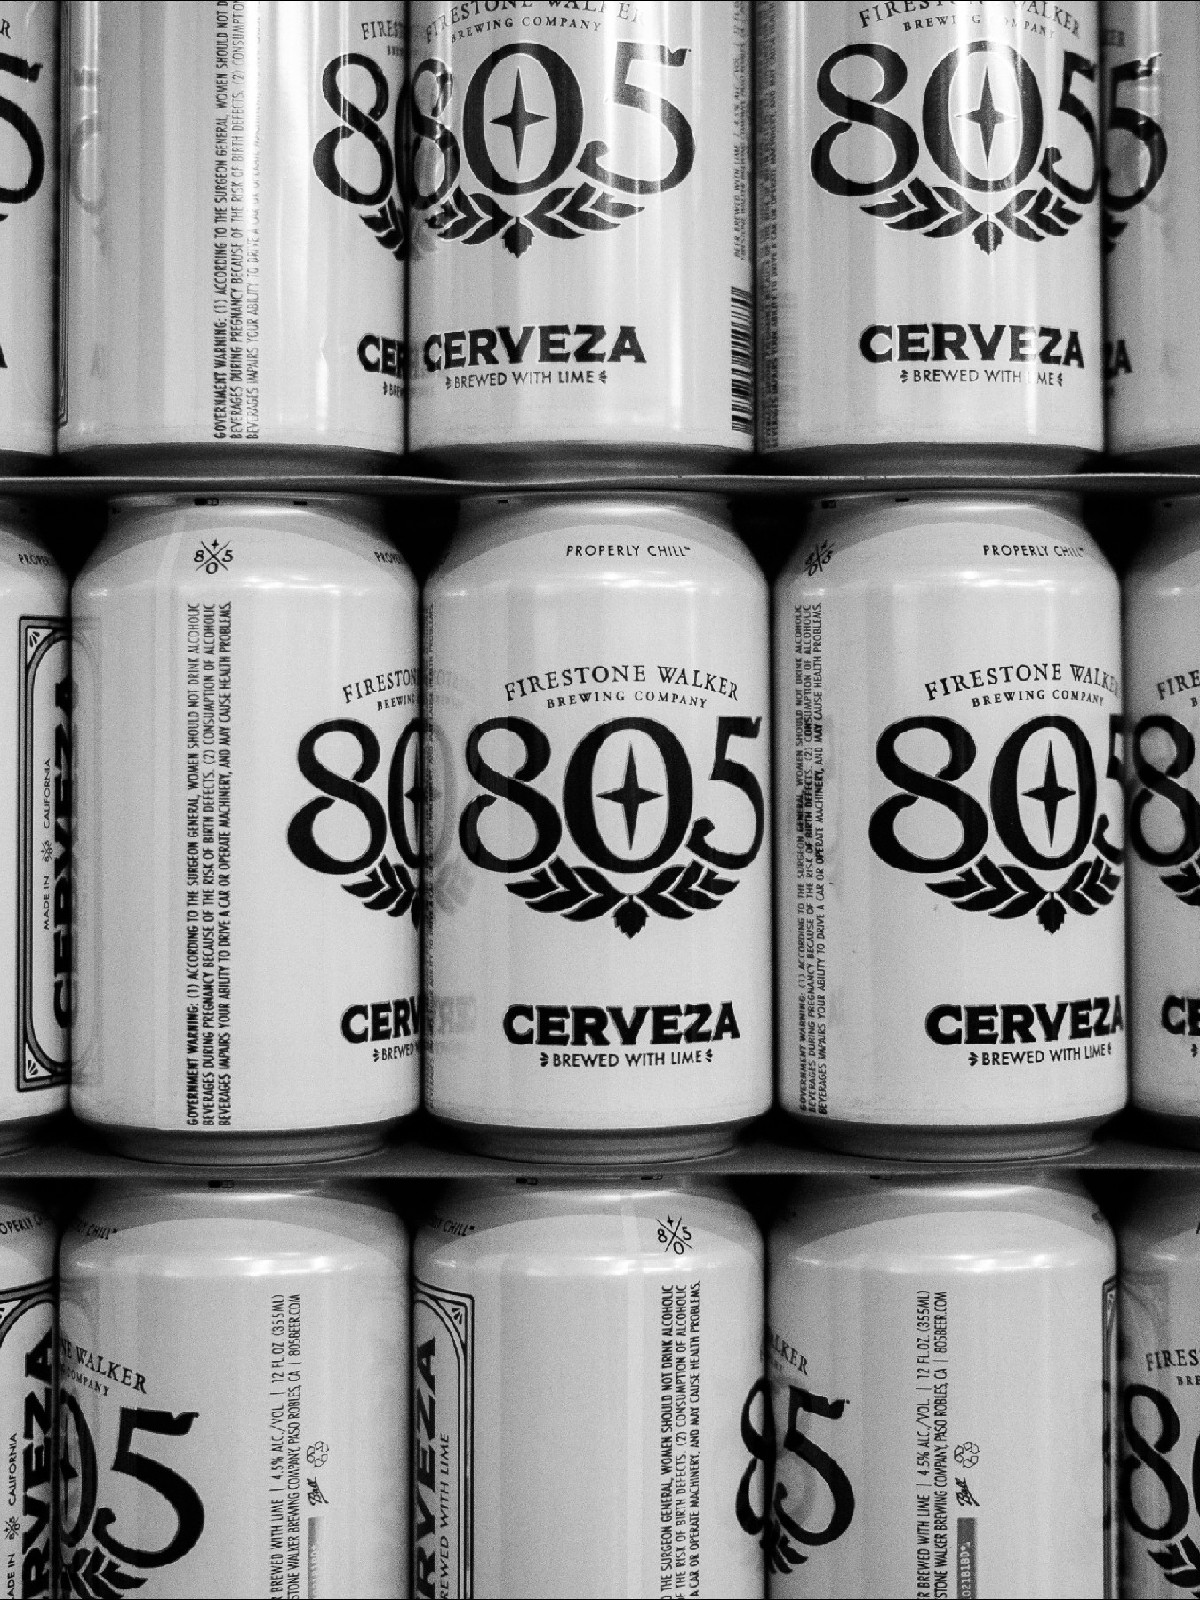 JUST DROPPED: 805 X YETI - 805 Beer